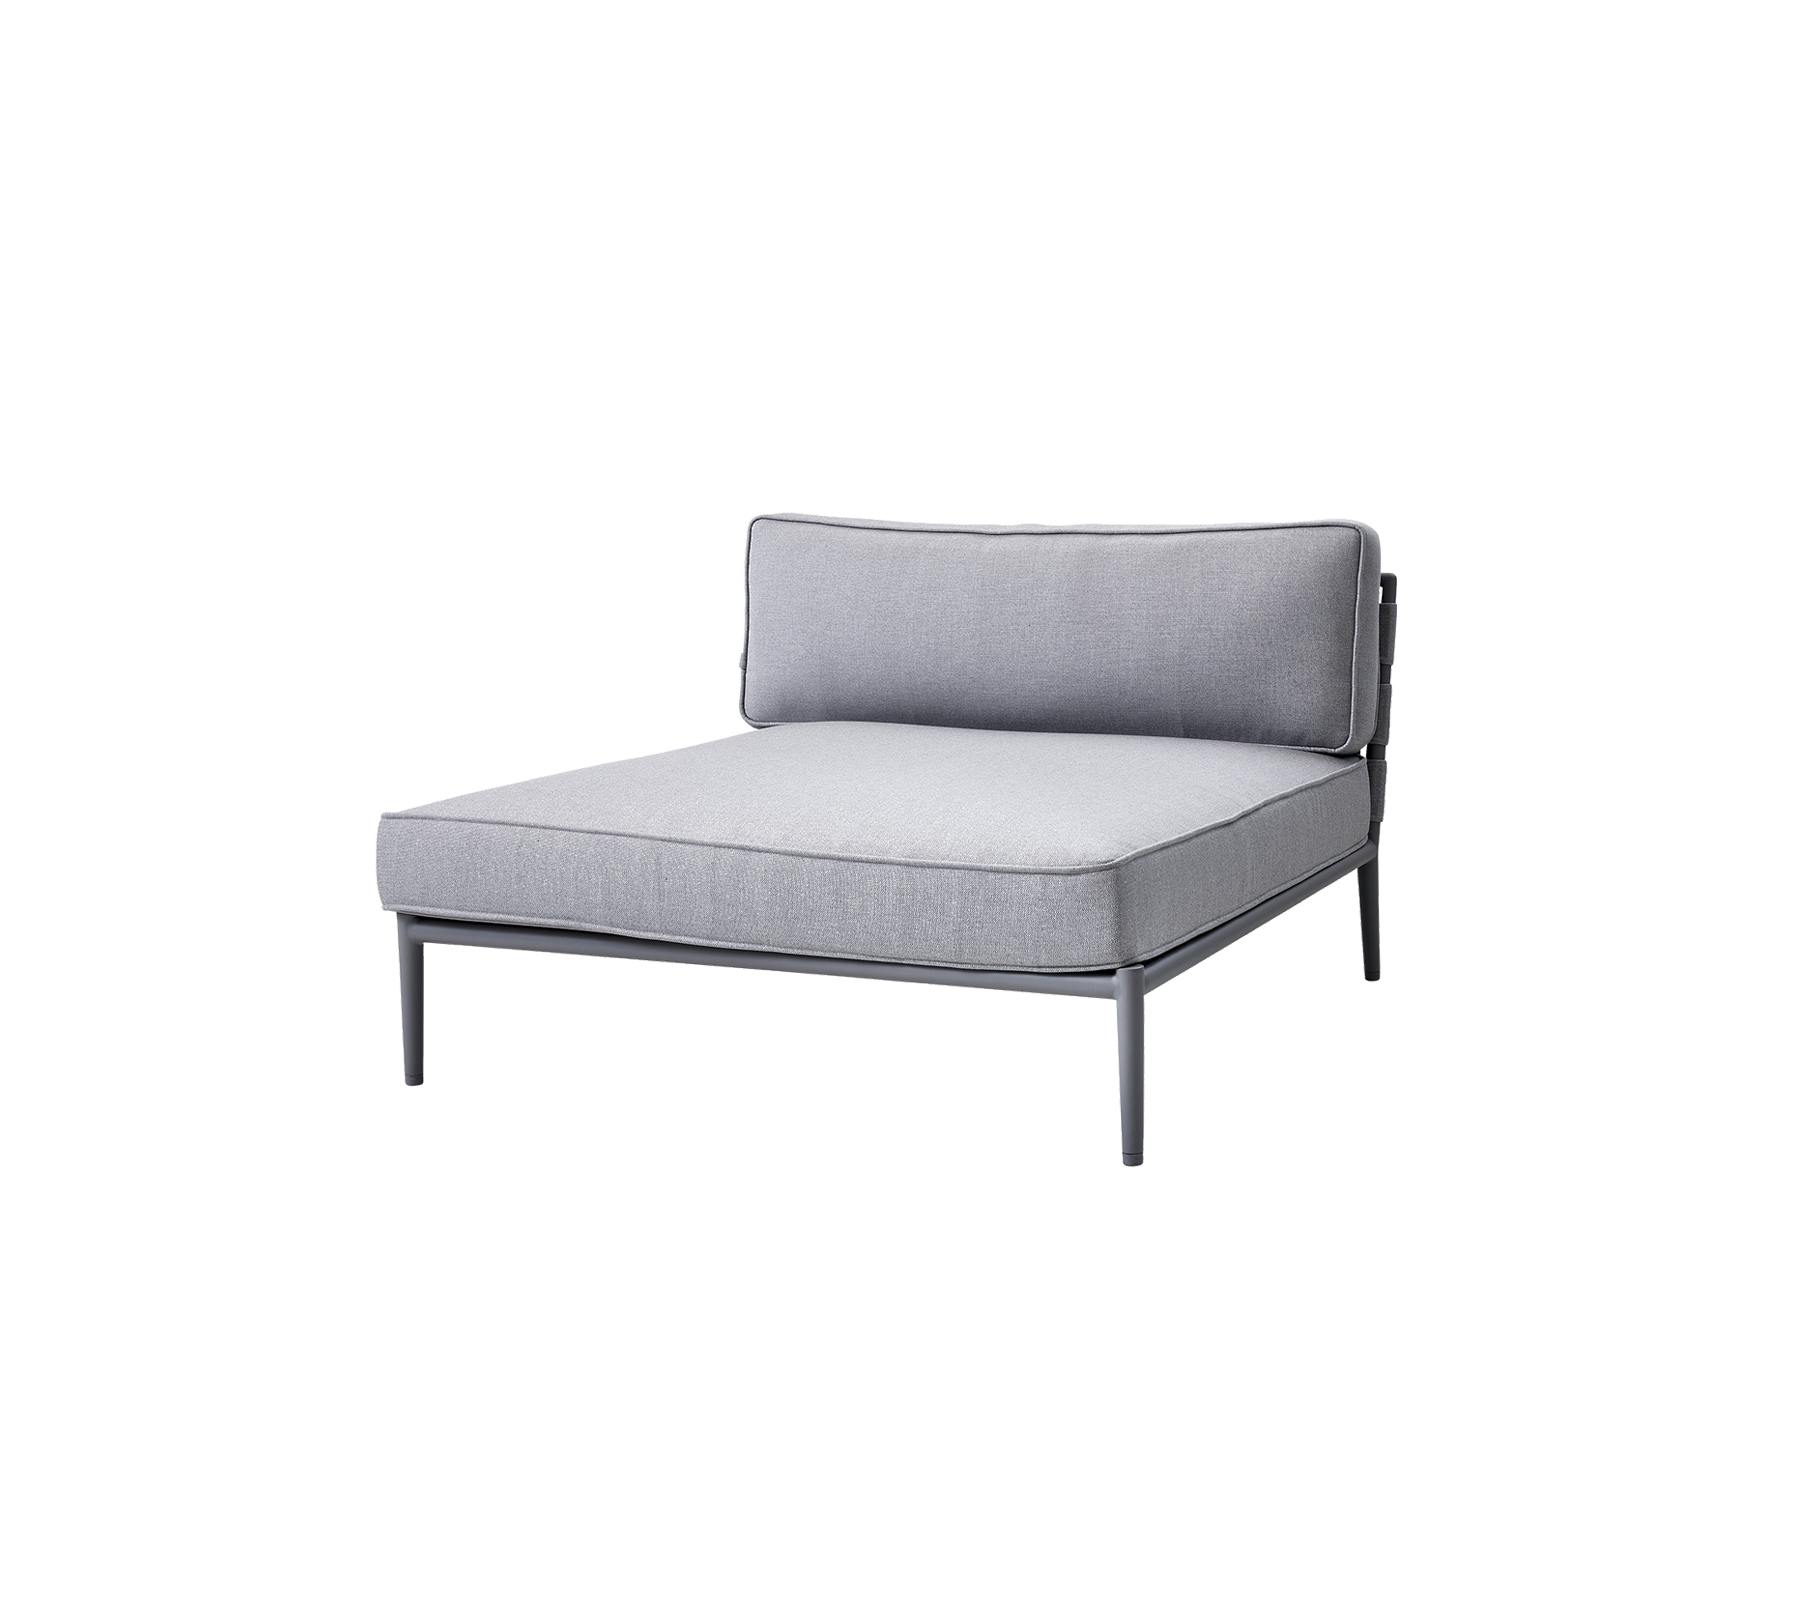 Conic daybed module